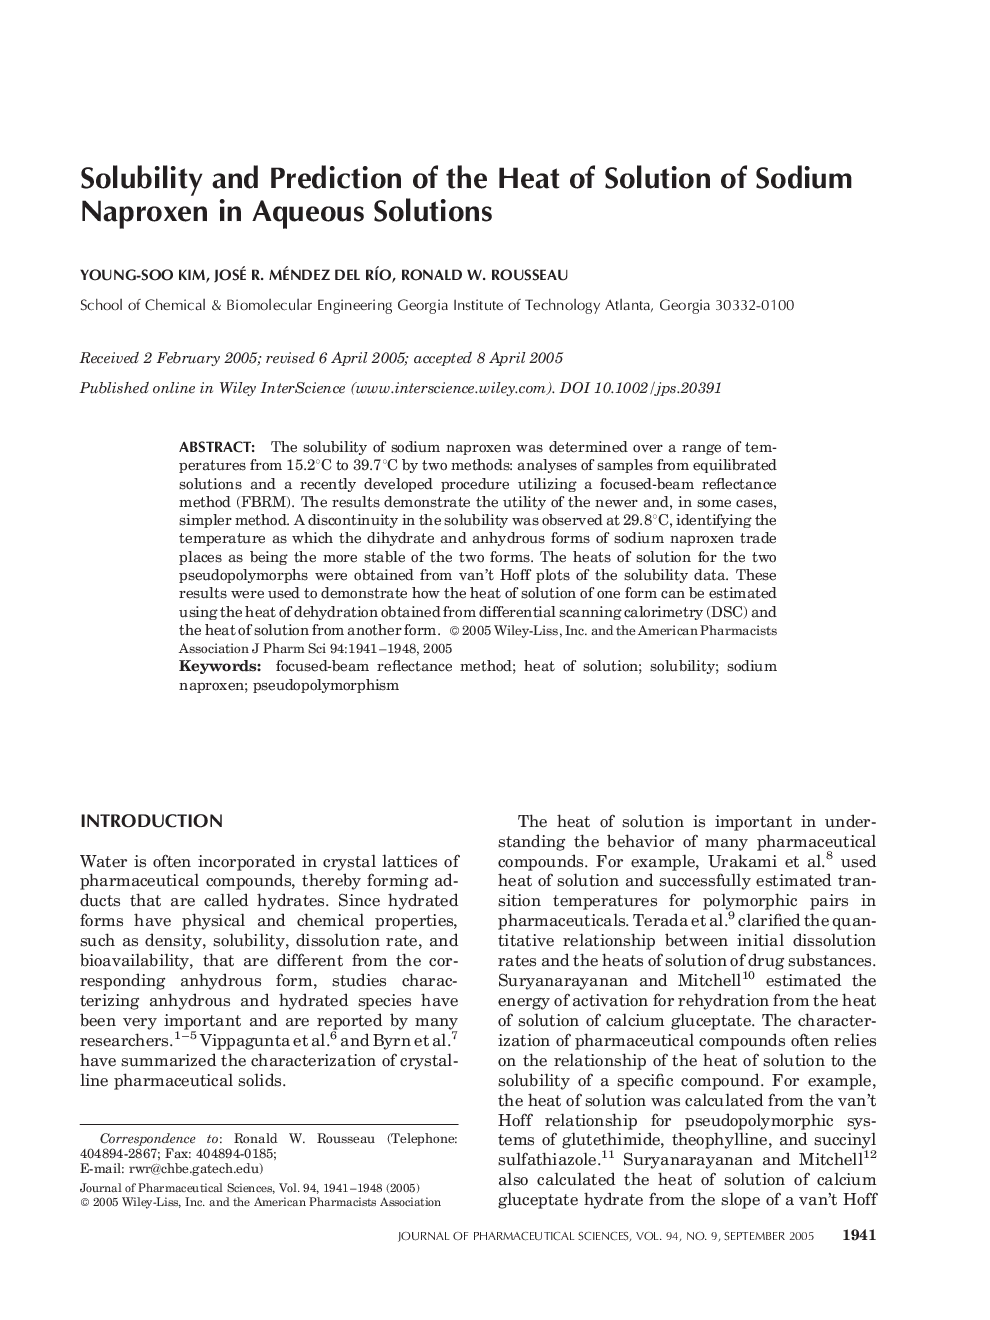 Solubility and Prediction of the Heat of Solution of Sodium Naproxen in Aqueous Solutions